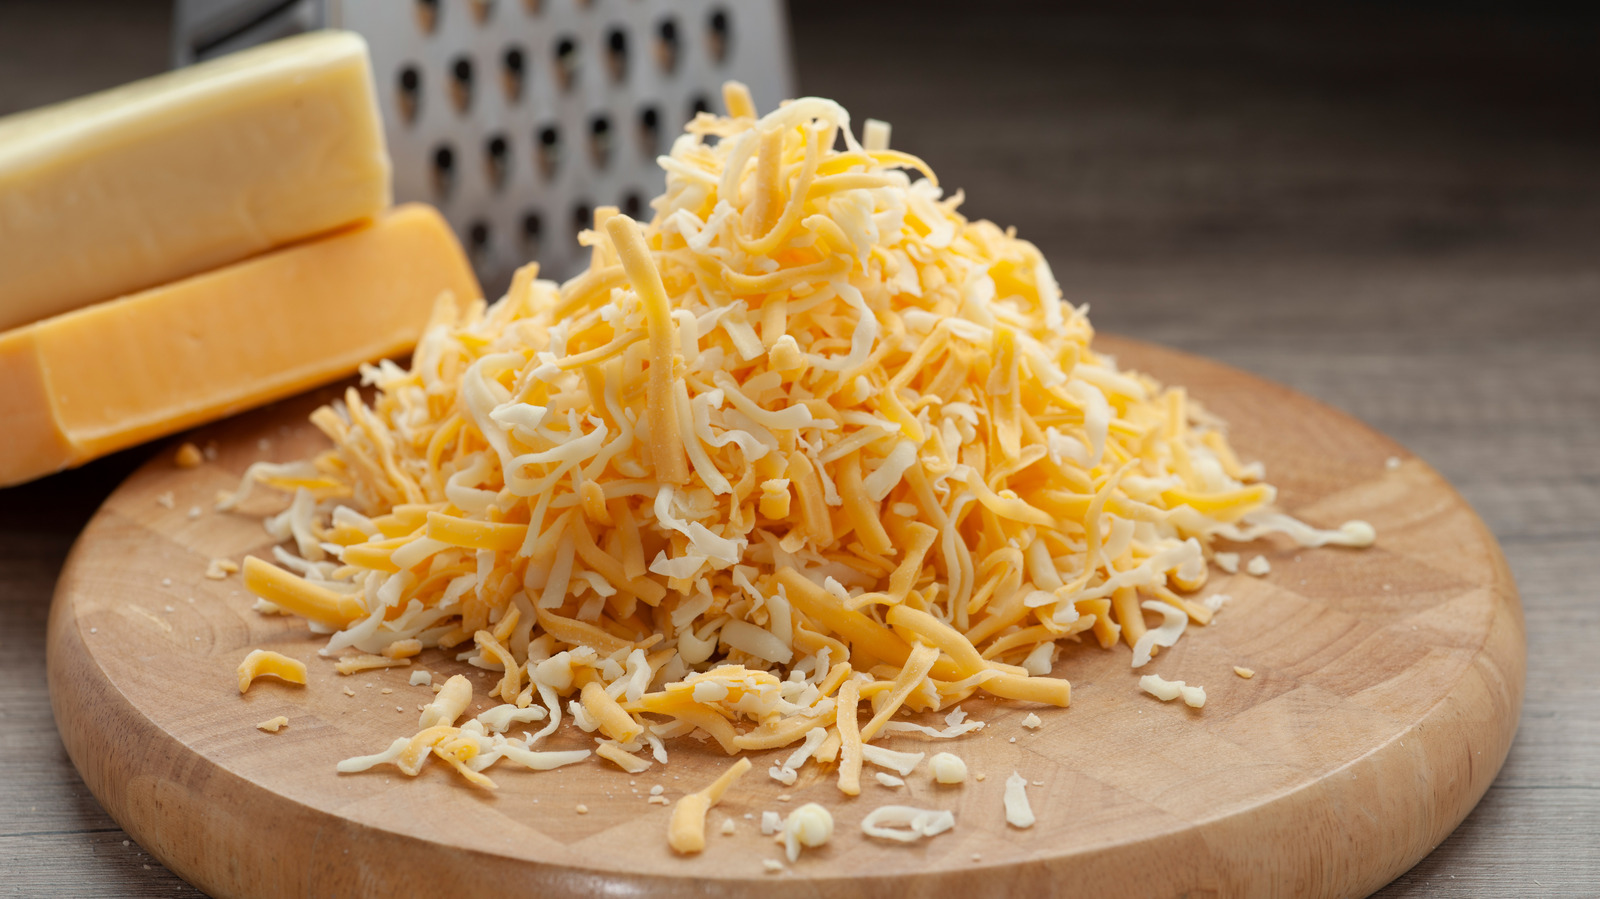 https://www.tastingtable.com/img/gallery/how-to-grate-cheese-when-you-dont-have-a-cheese-grater/l-intro-1636482021.jpg